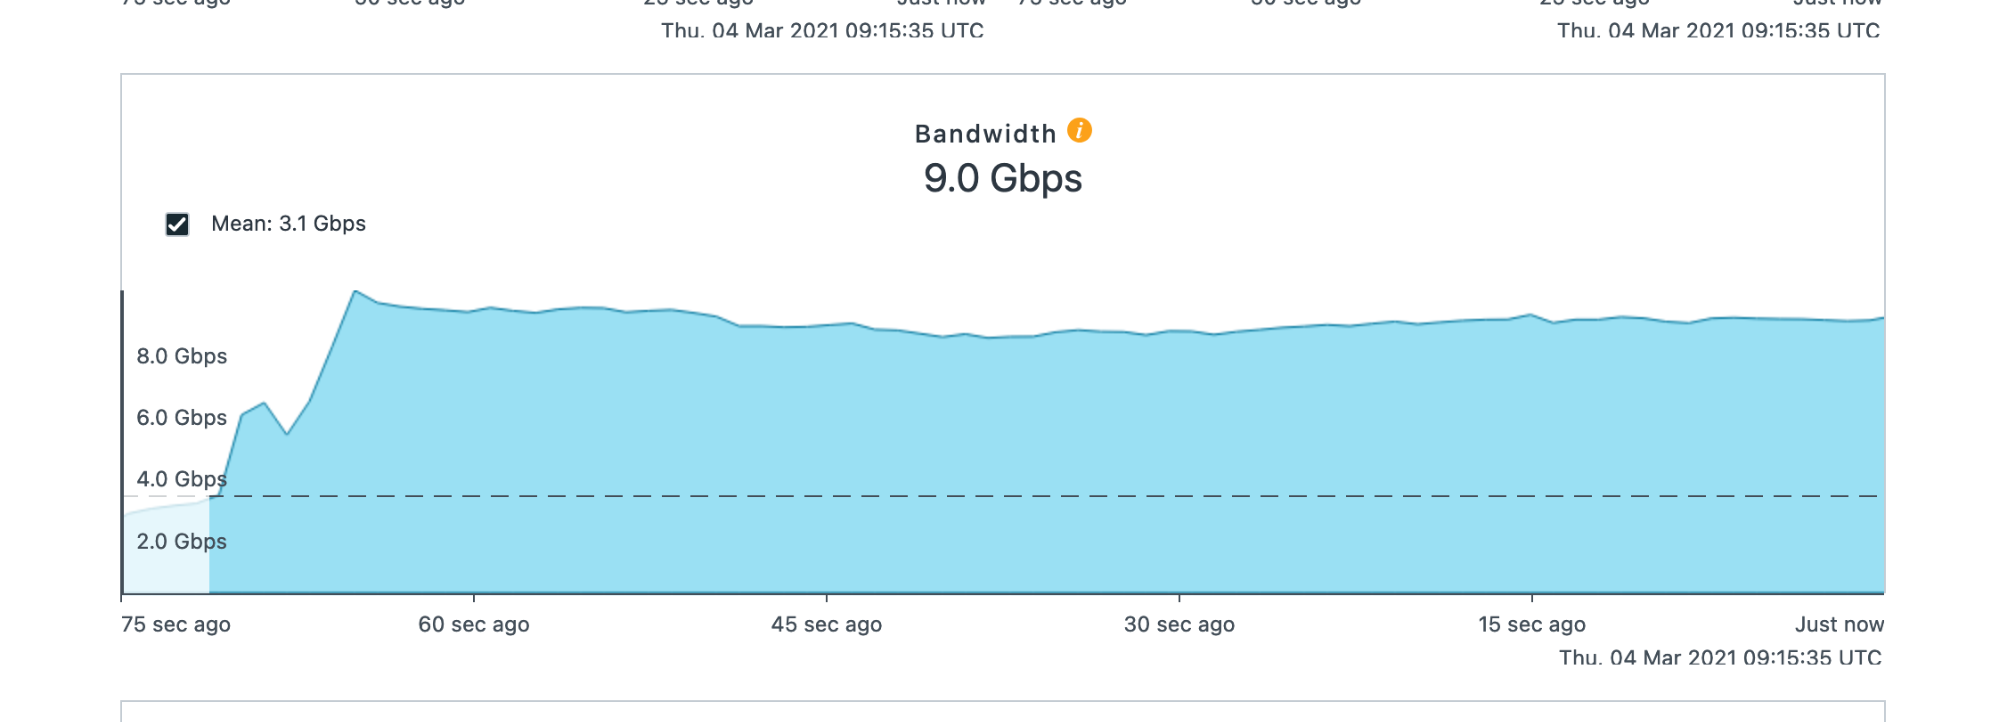 Graph showing 6000 users maxing out at a sustained 9.0 Gbps of traffic.